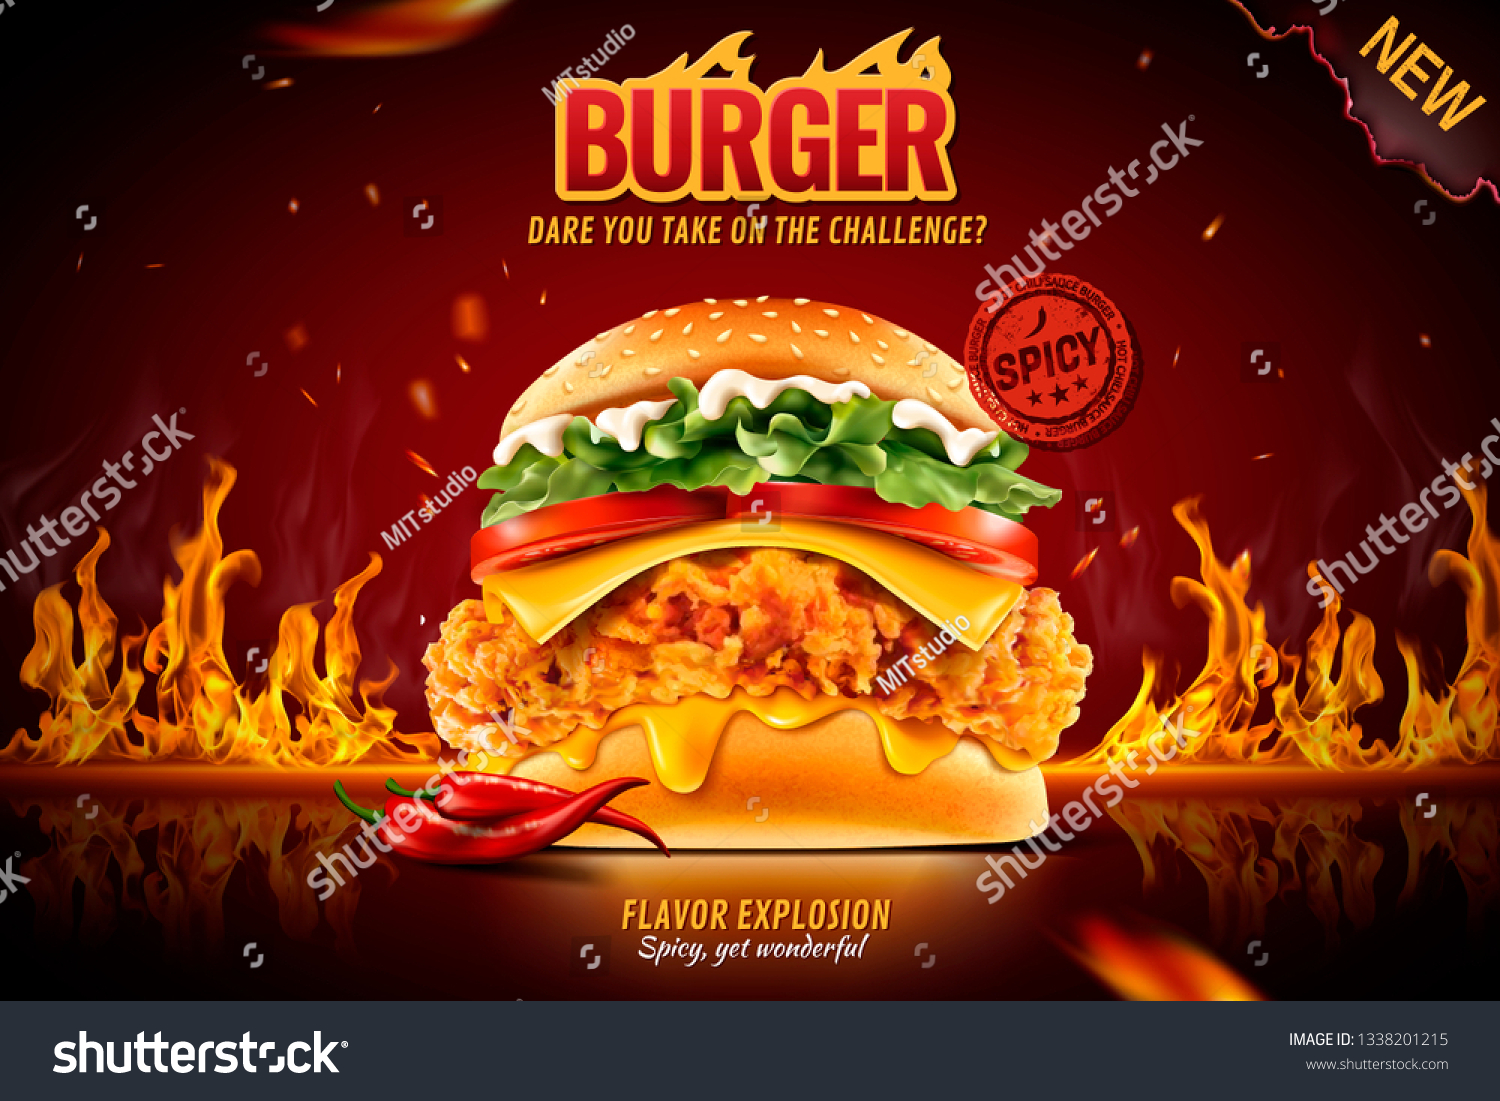 Delicious Spicy Fried Chicken Burger Ads Stock Vector Royalty Free 1338201215